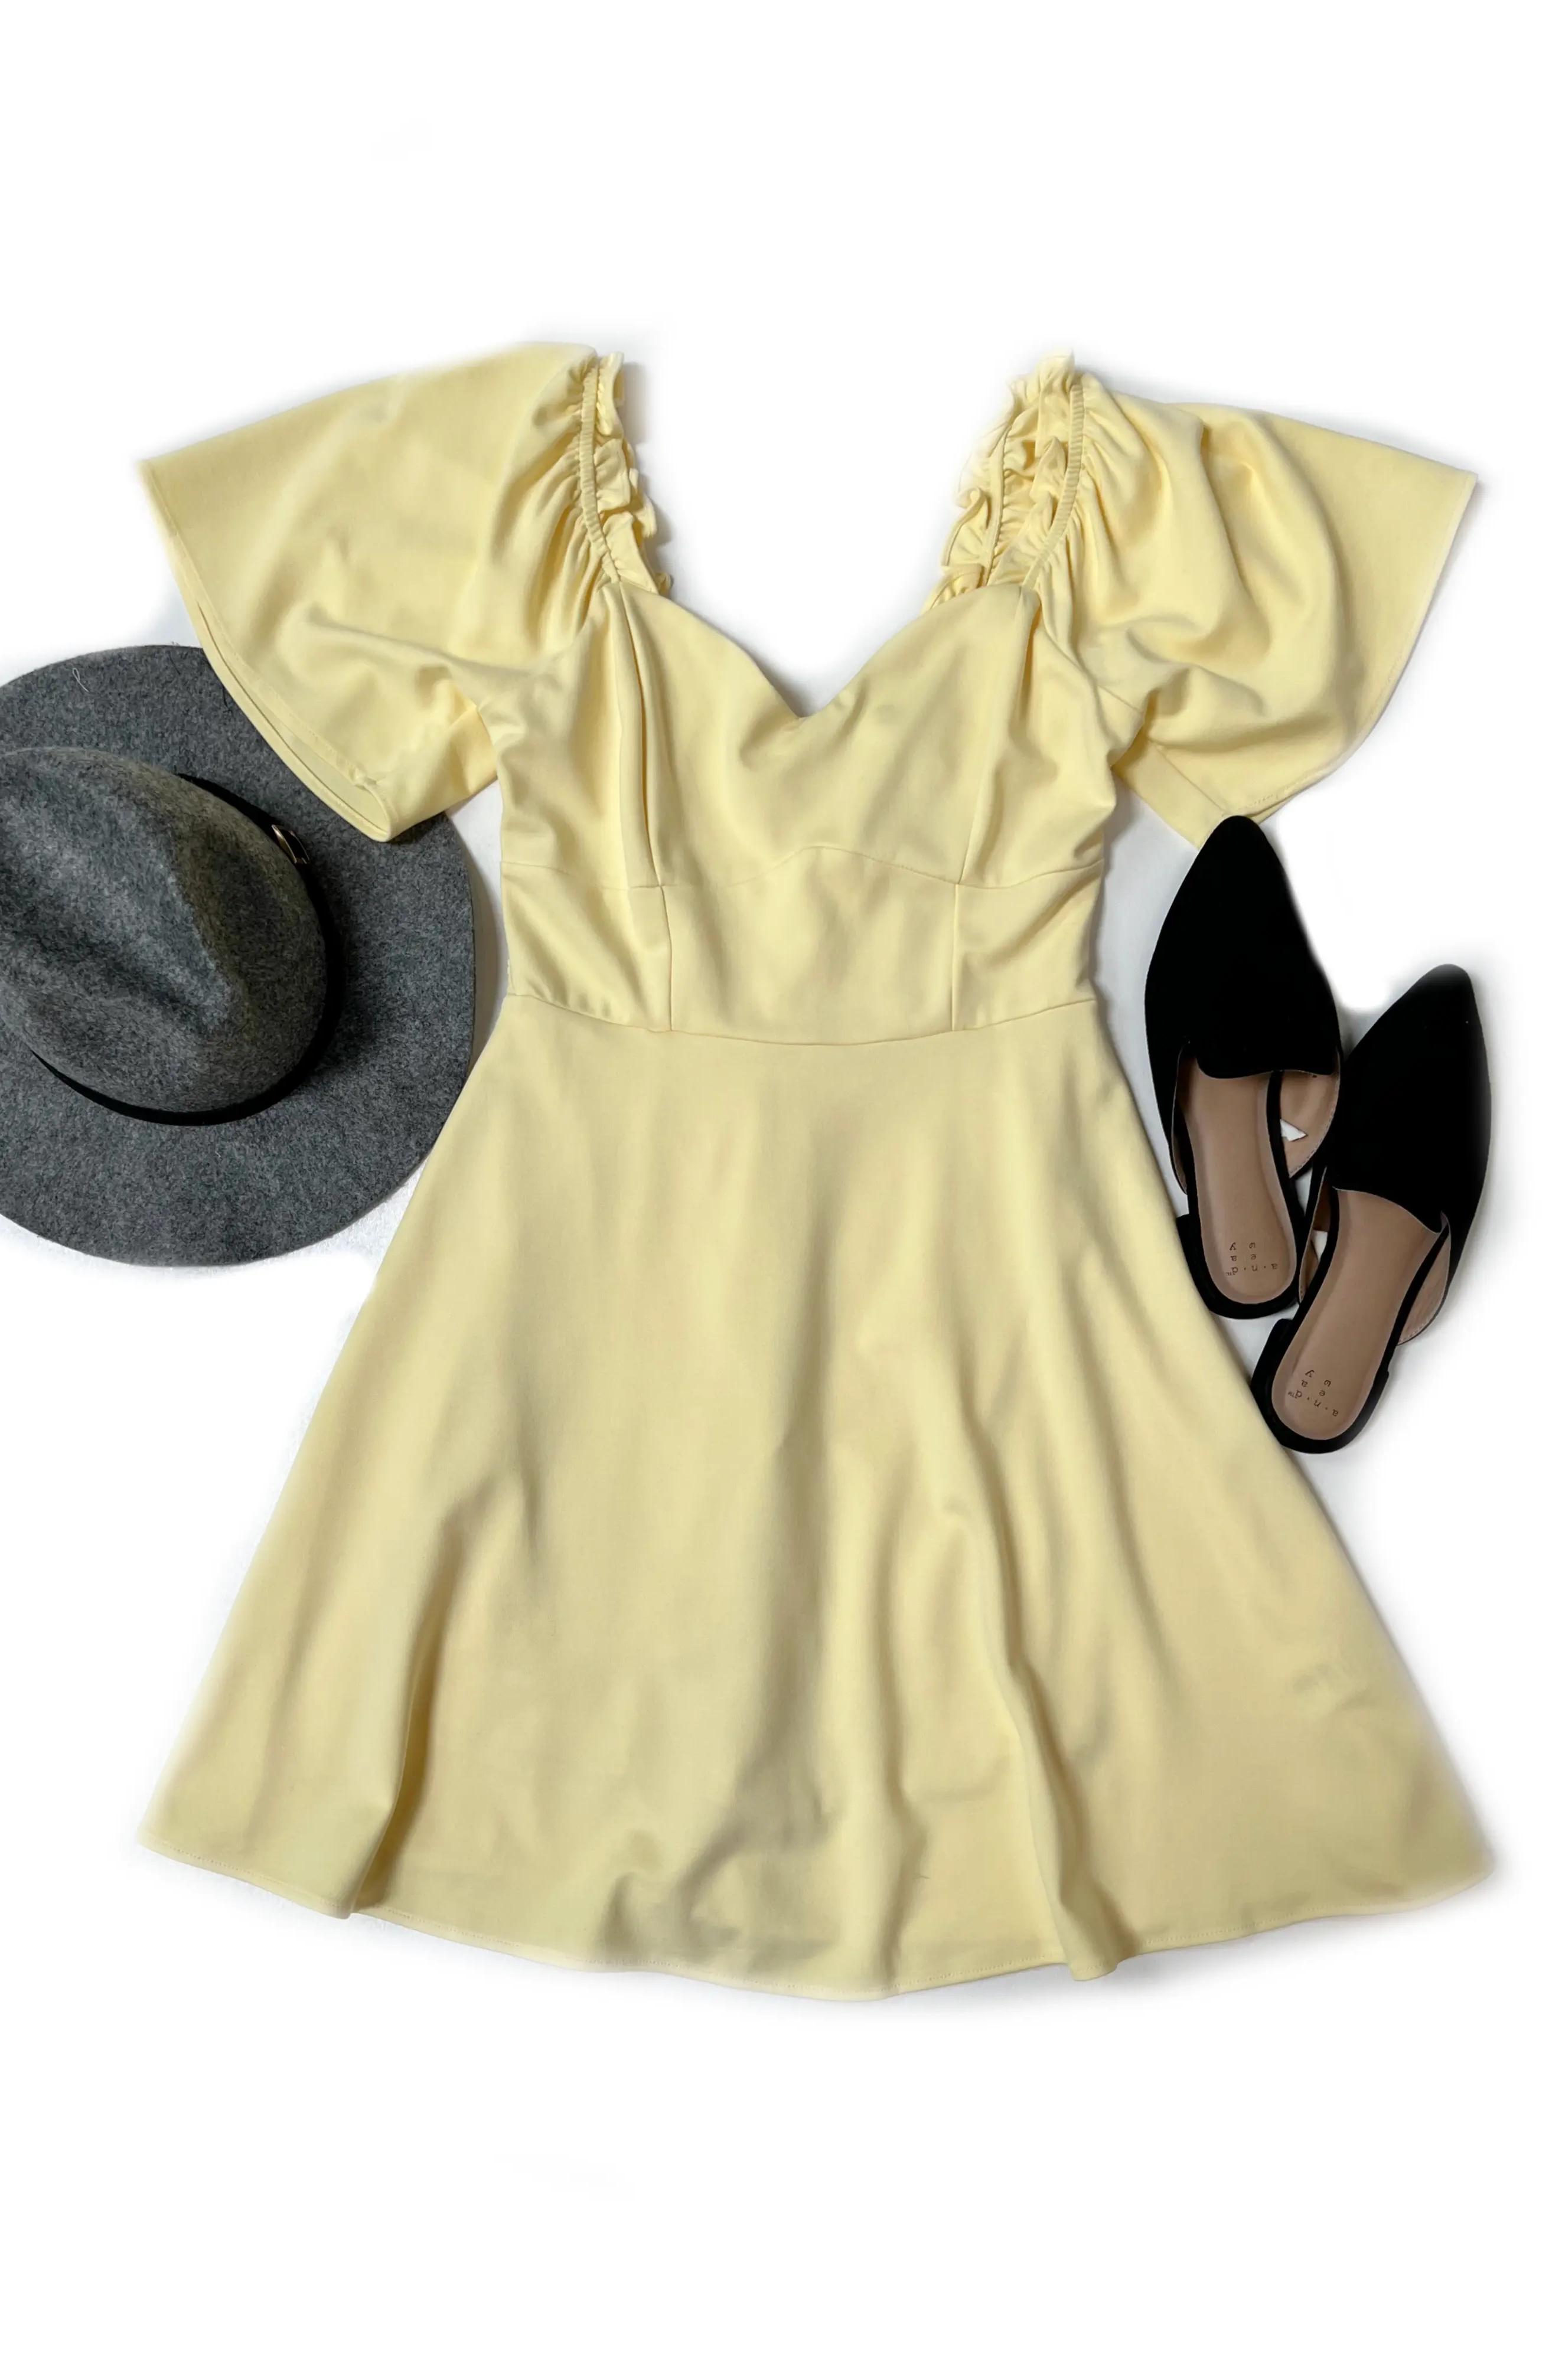 Songs of Spring - Romper Dress Boutique Simplified